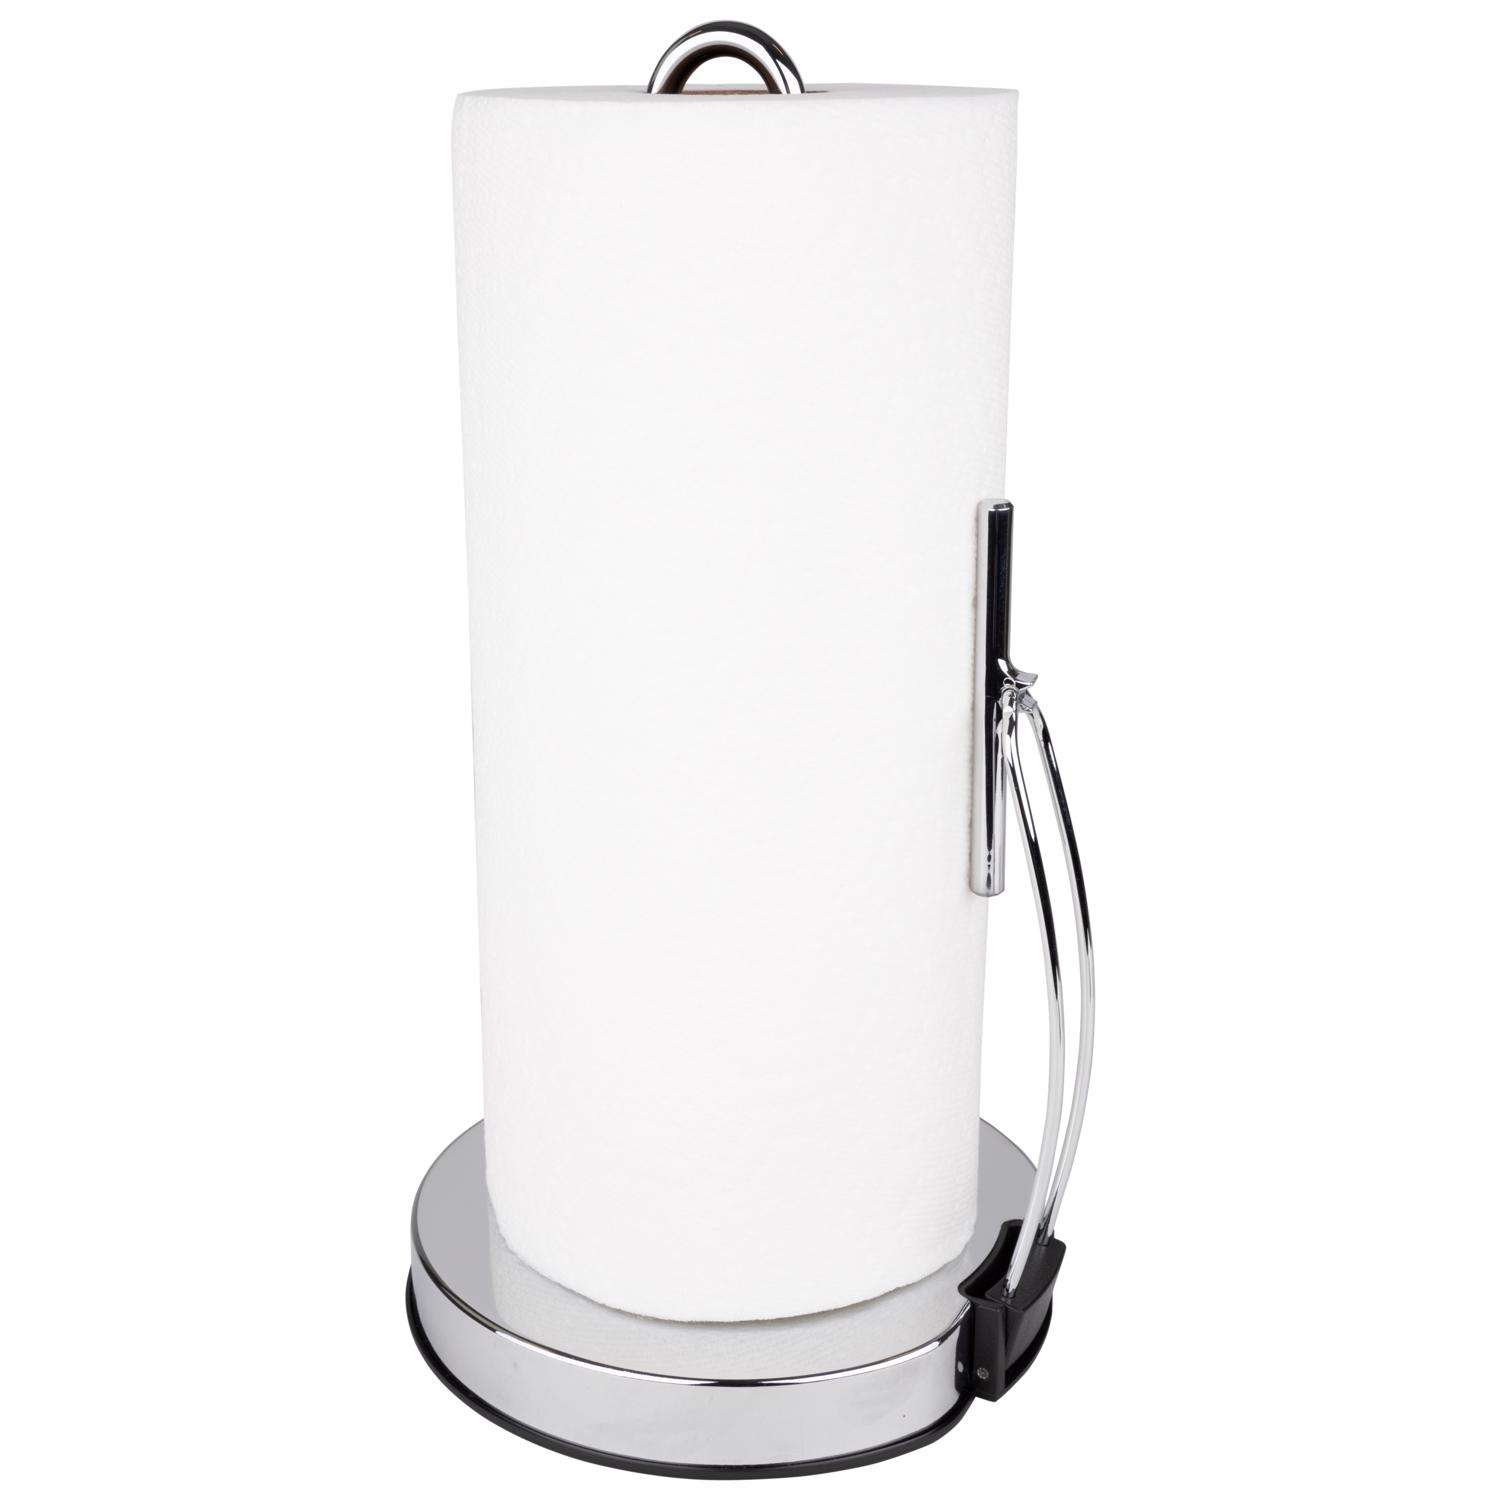 Spectrum Clear Plastic Wall or Cabinet Mount Paper Towel Holder